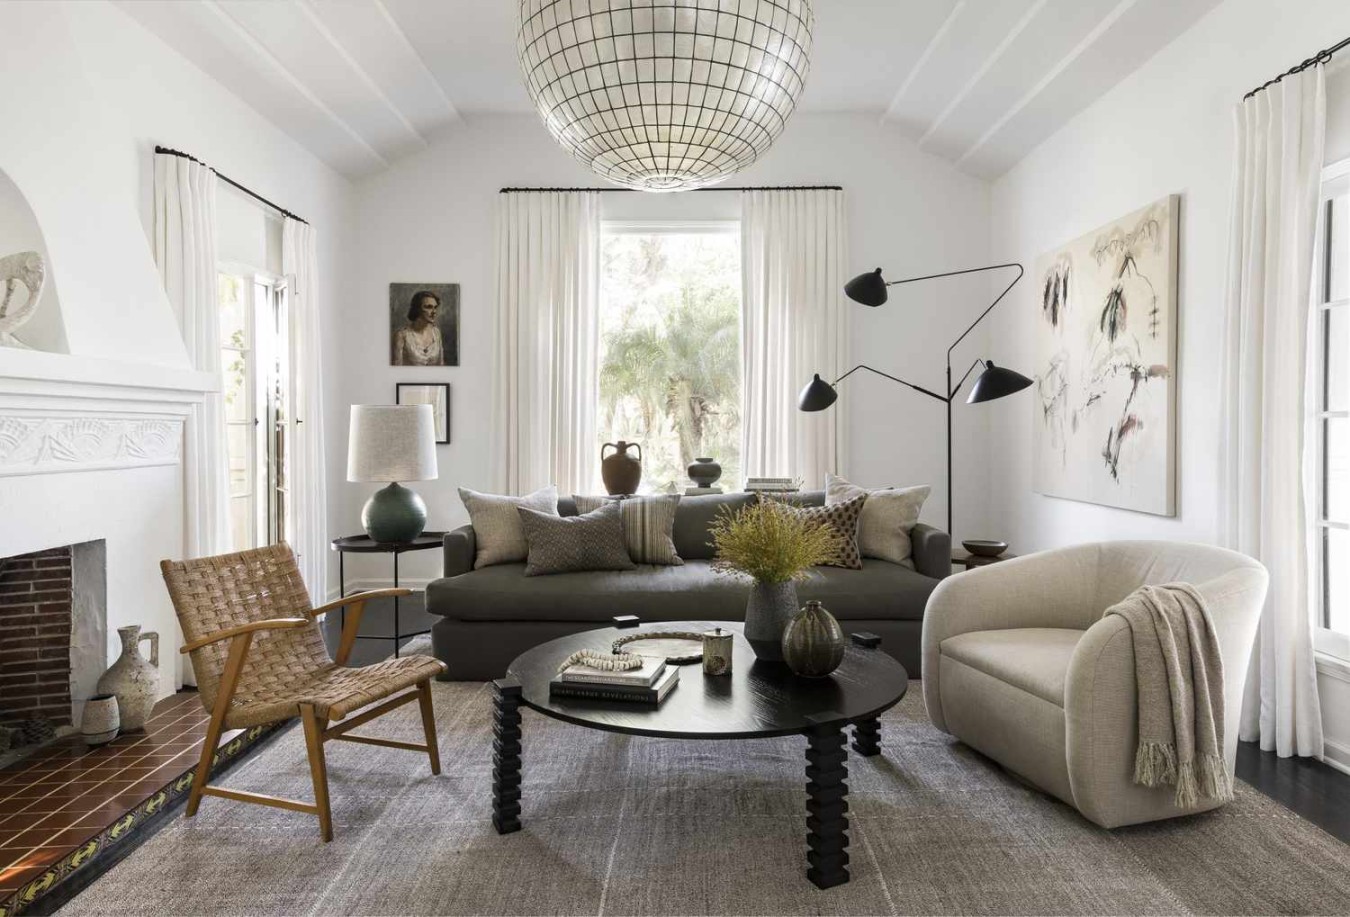 Living Room Décor Ideas to Create an Inviting, Functional Space